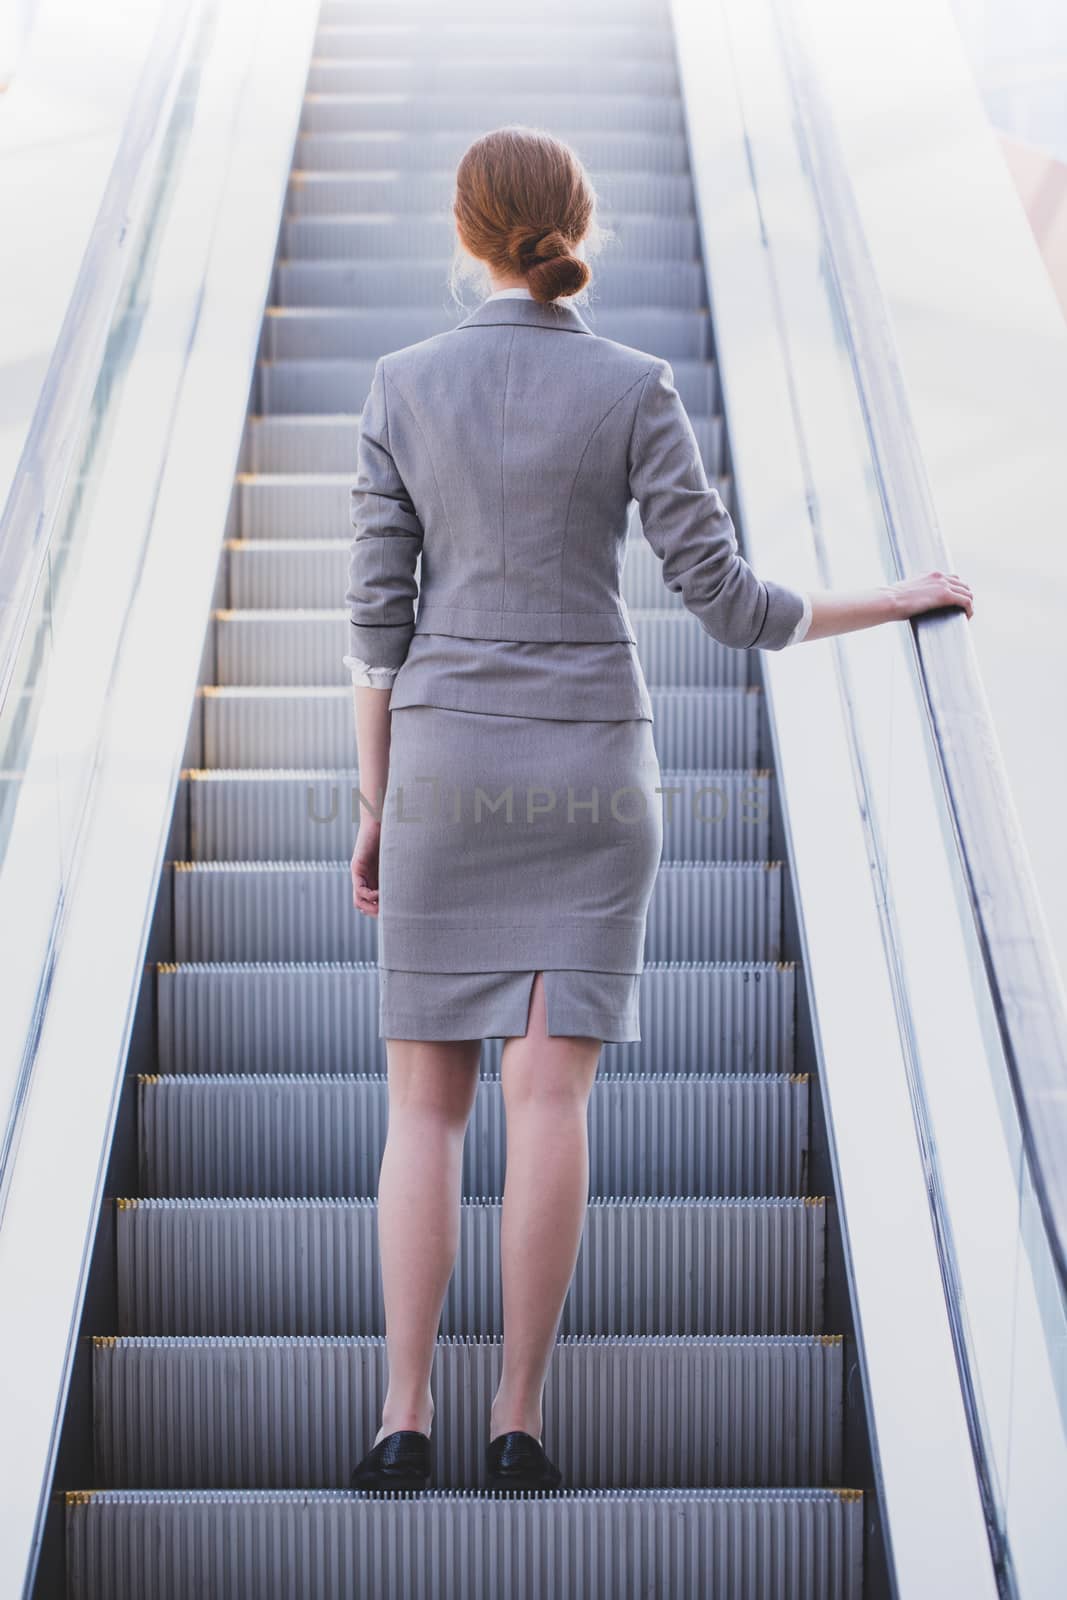 Back view of attractive business woman in suit on escalator